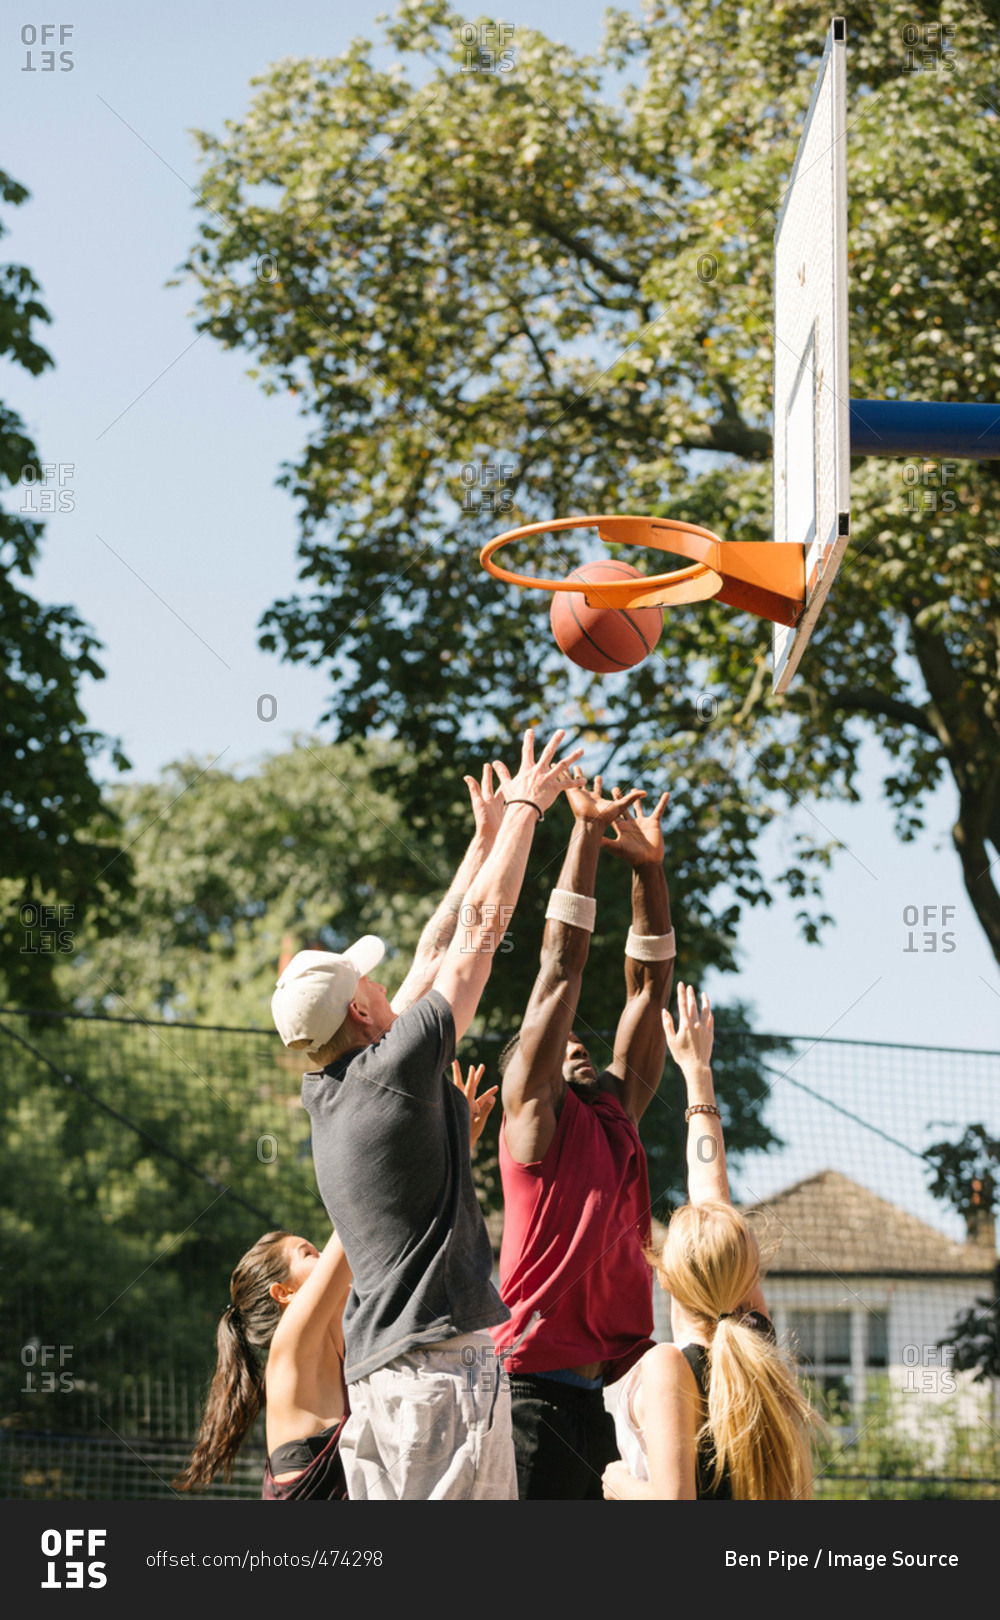 Female and male basketball players throwing ball at basketball hoop